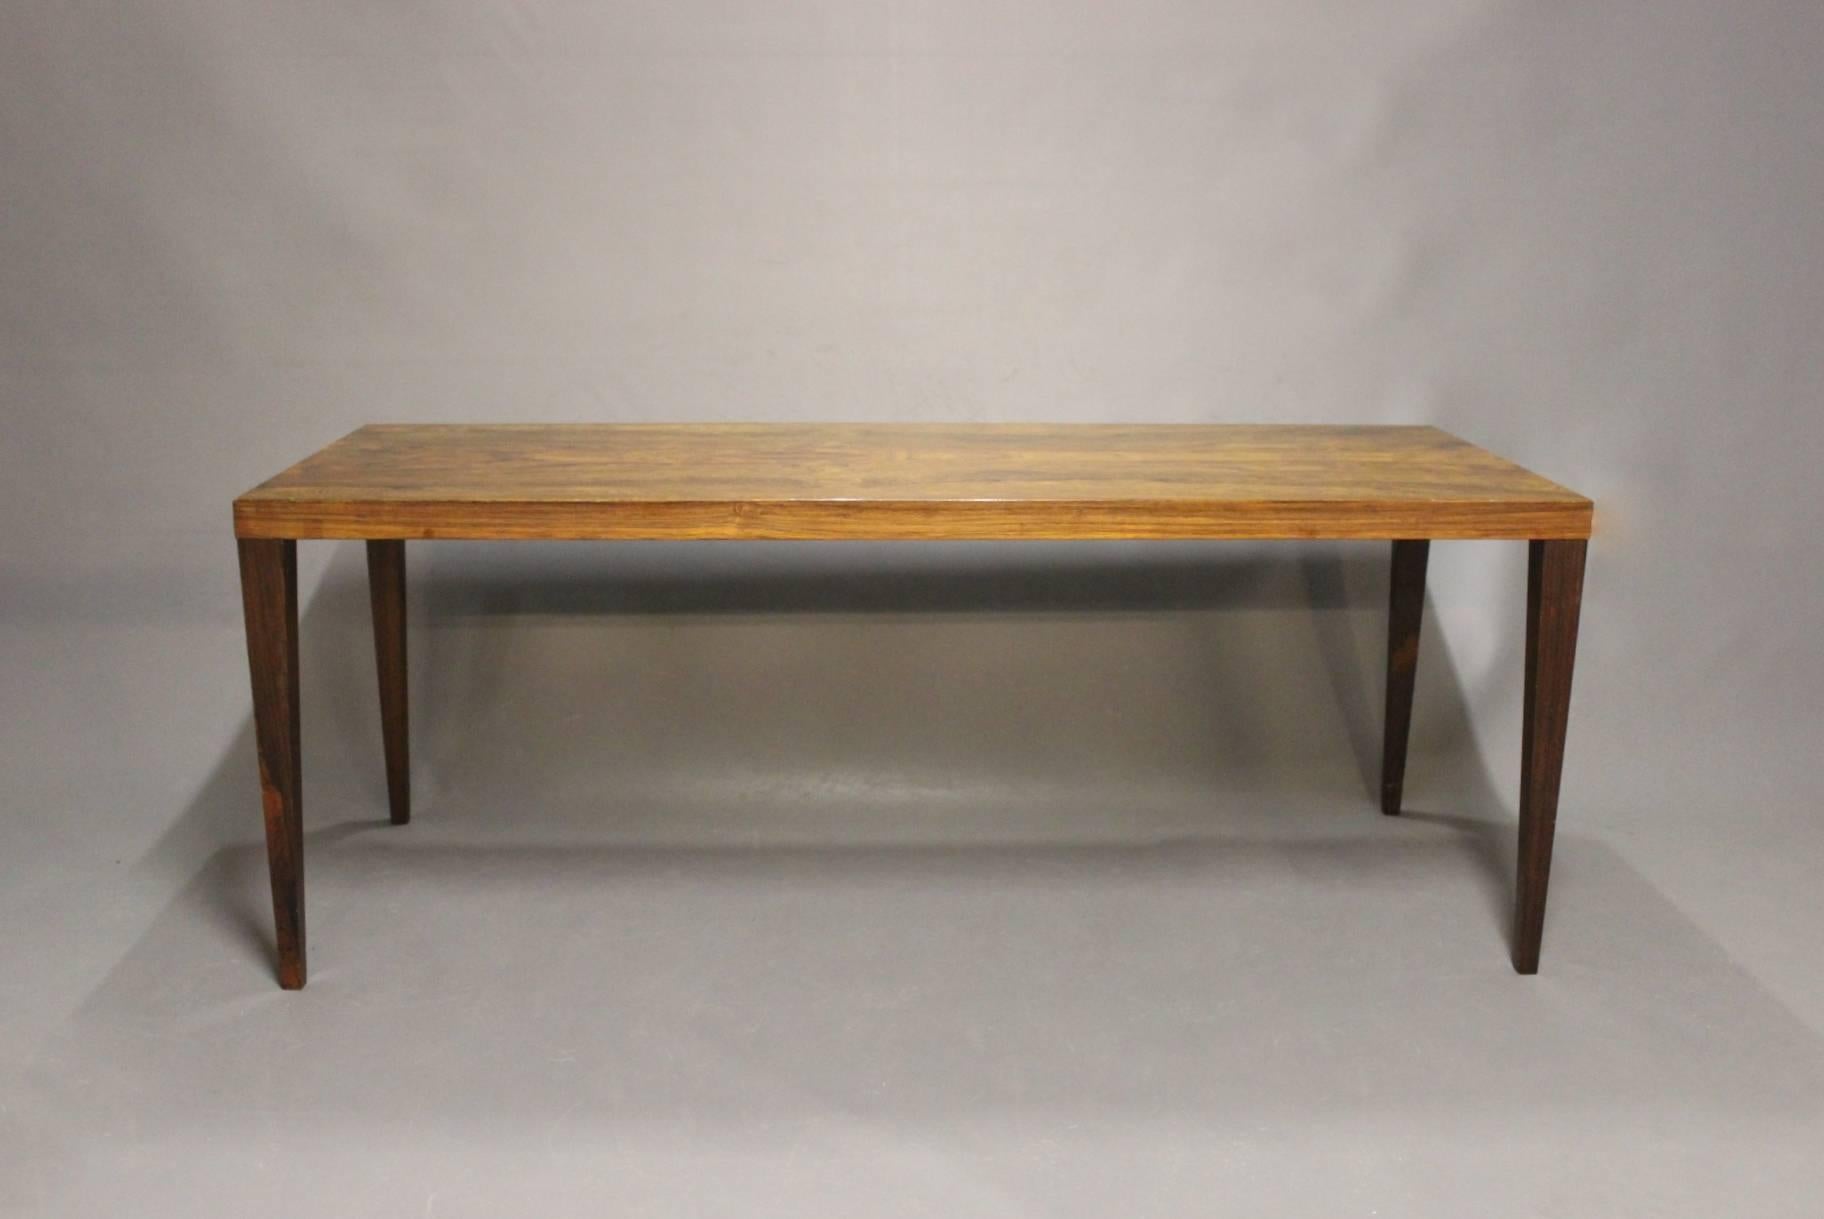 Oblong coffee table with extension leaf in rosewood of Danish Design manufactured at Silkeborg furniture factory in the 1960s.